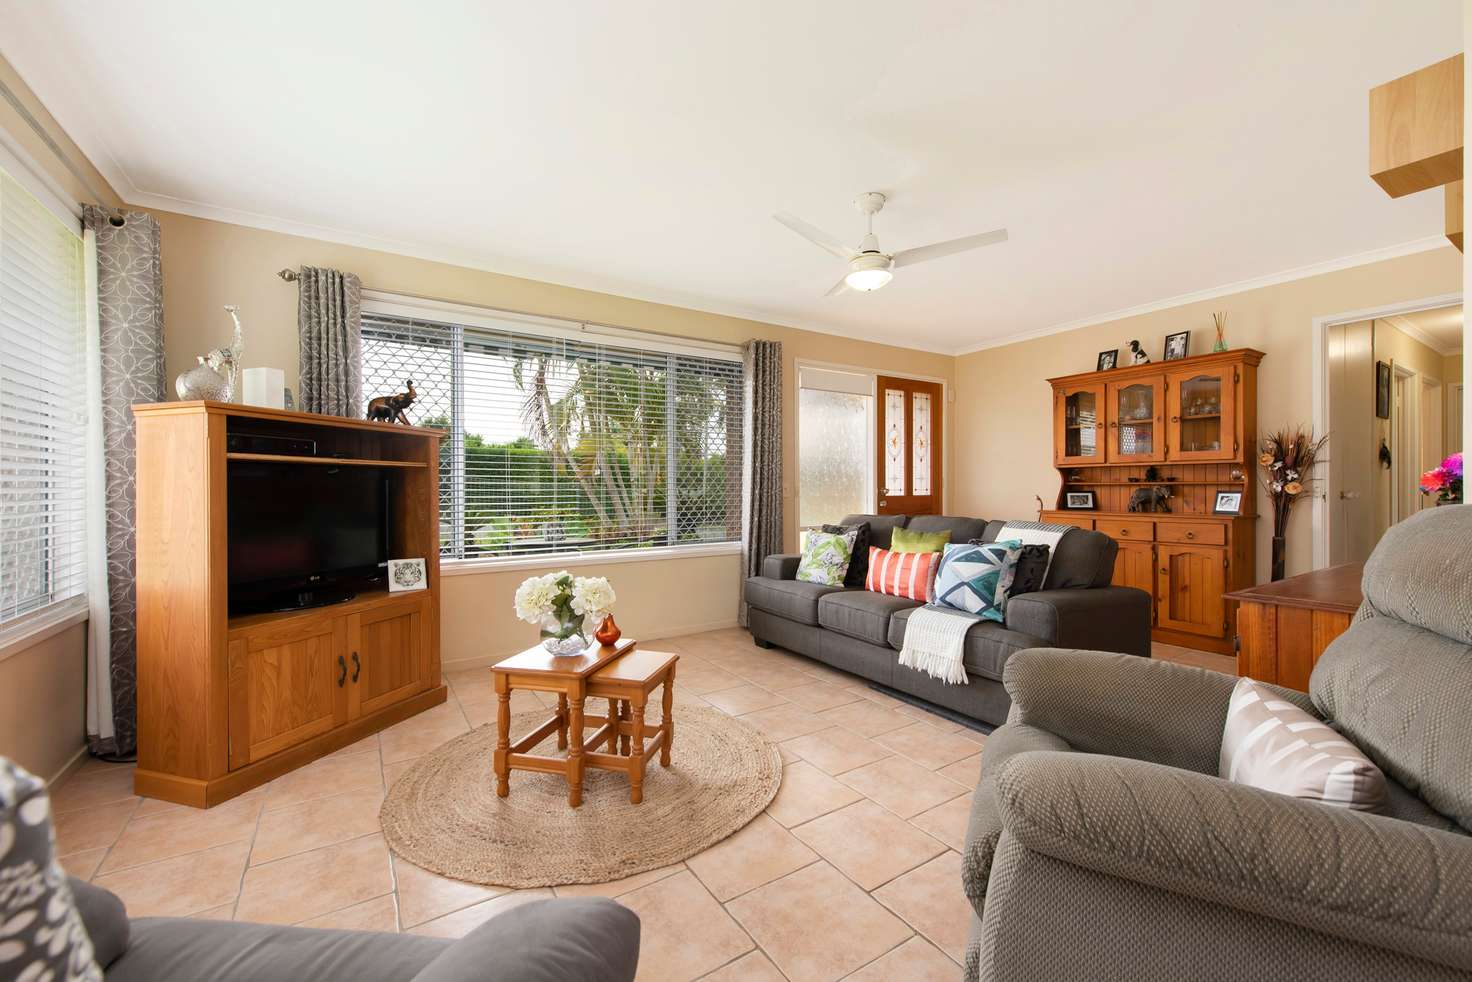 Main view of Homely house listing, 1 Hyacinth Street, Daisy Hill QLD 4127